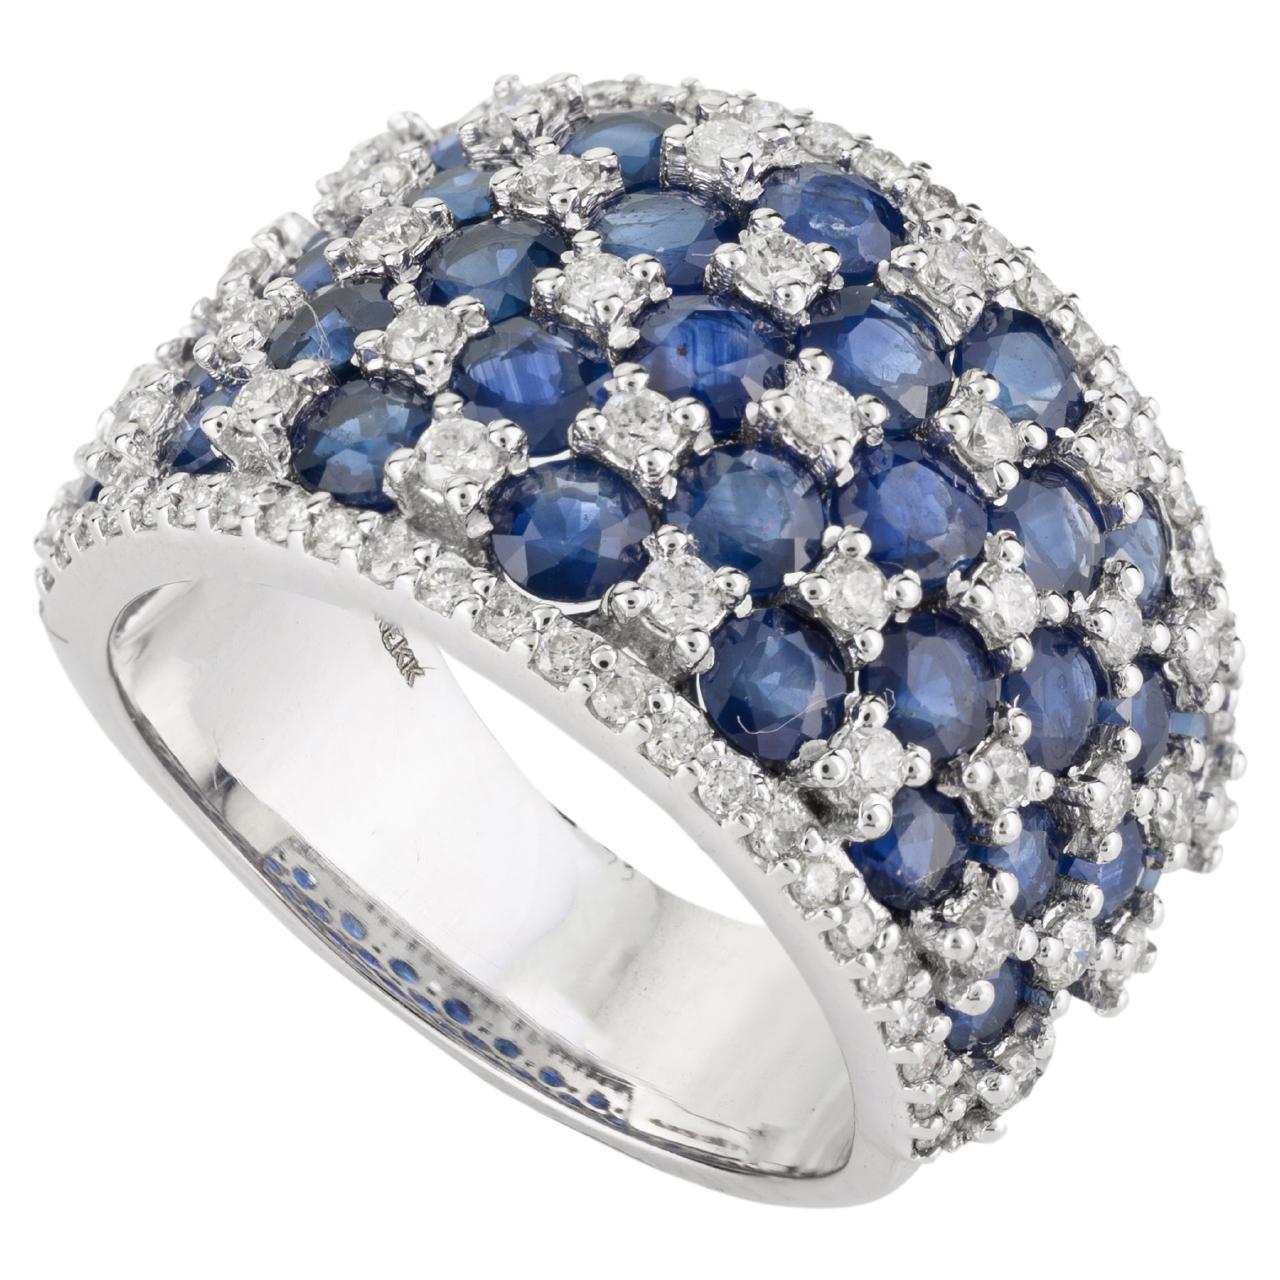 For Sale:  Stunning 4.11 CTW Sapphire Diamond Wide Cocktail Band Ring in 18k White Gold